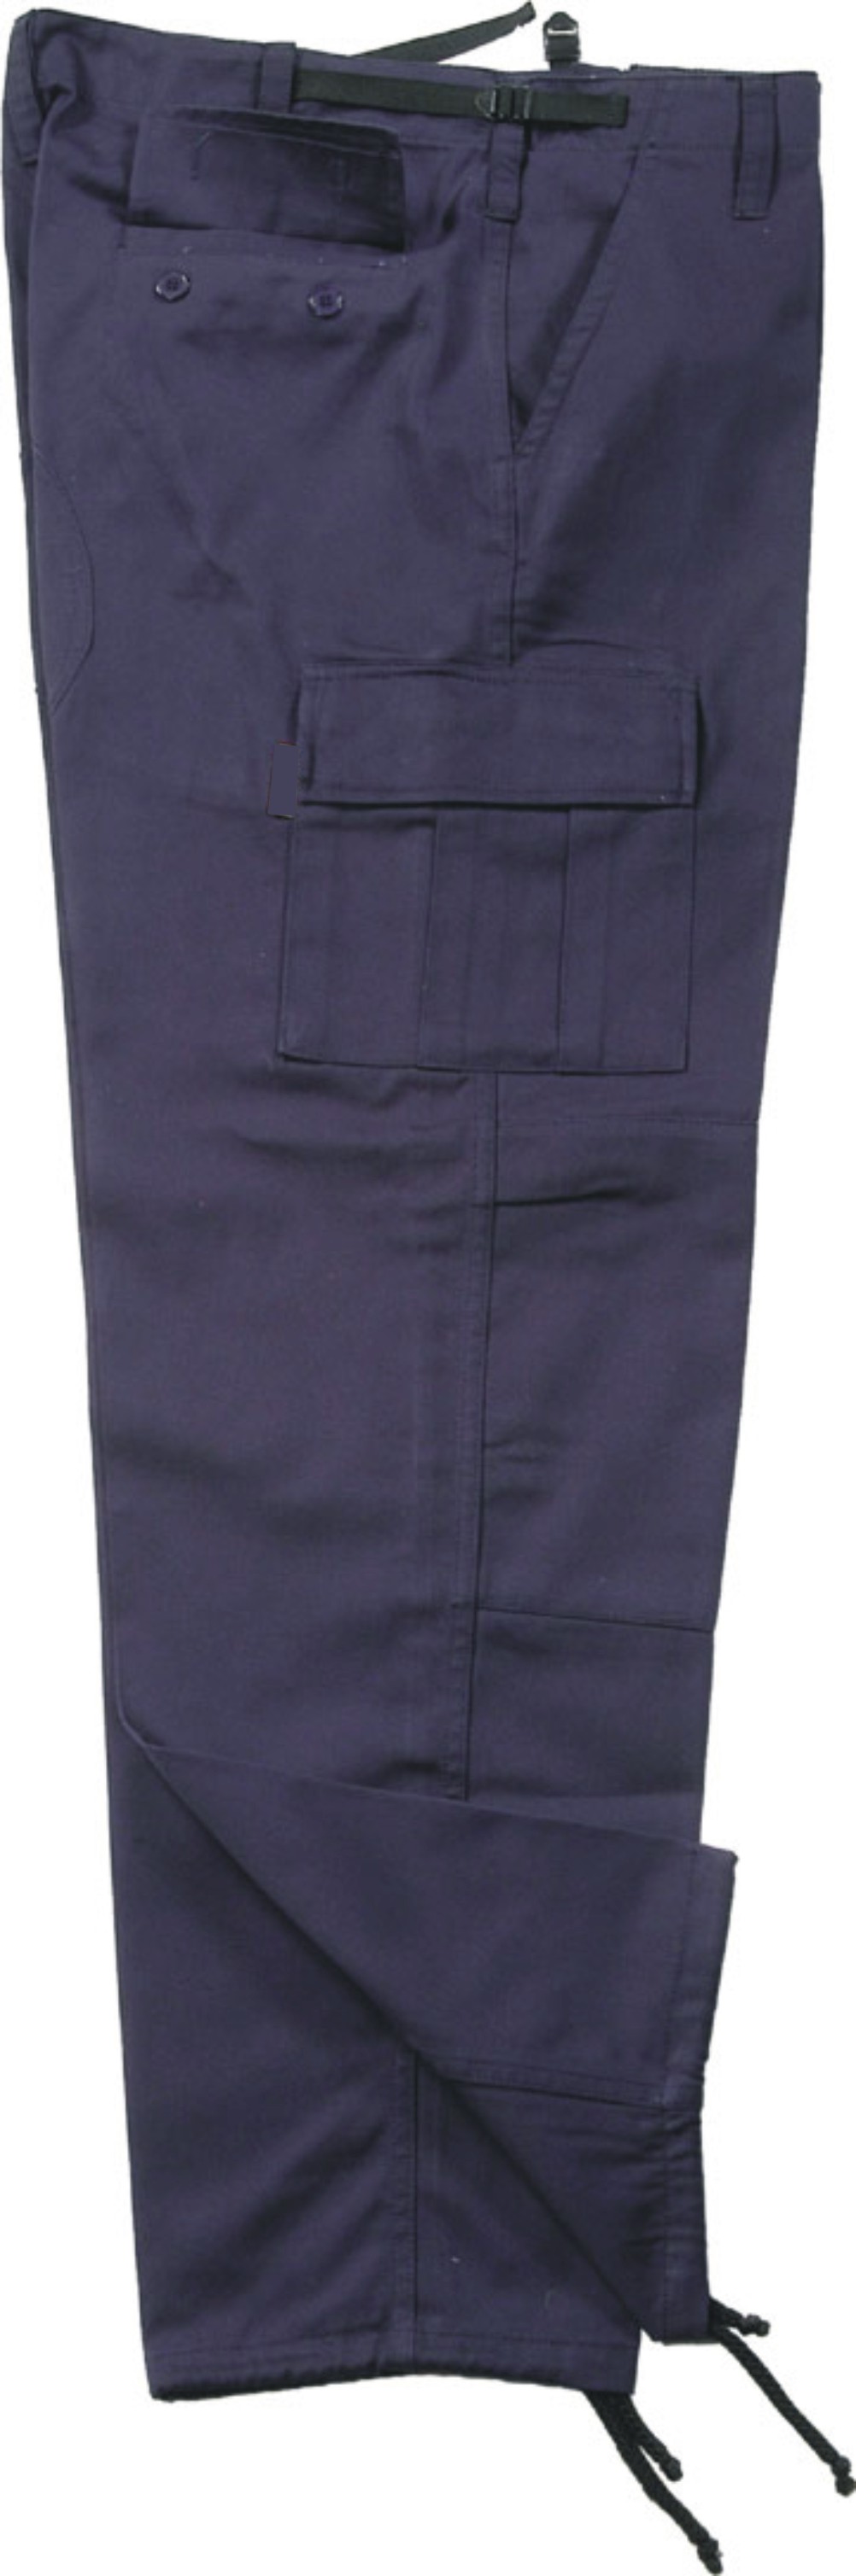 Trousers - BTG405-image